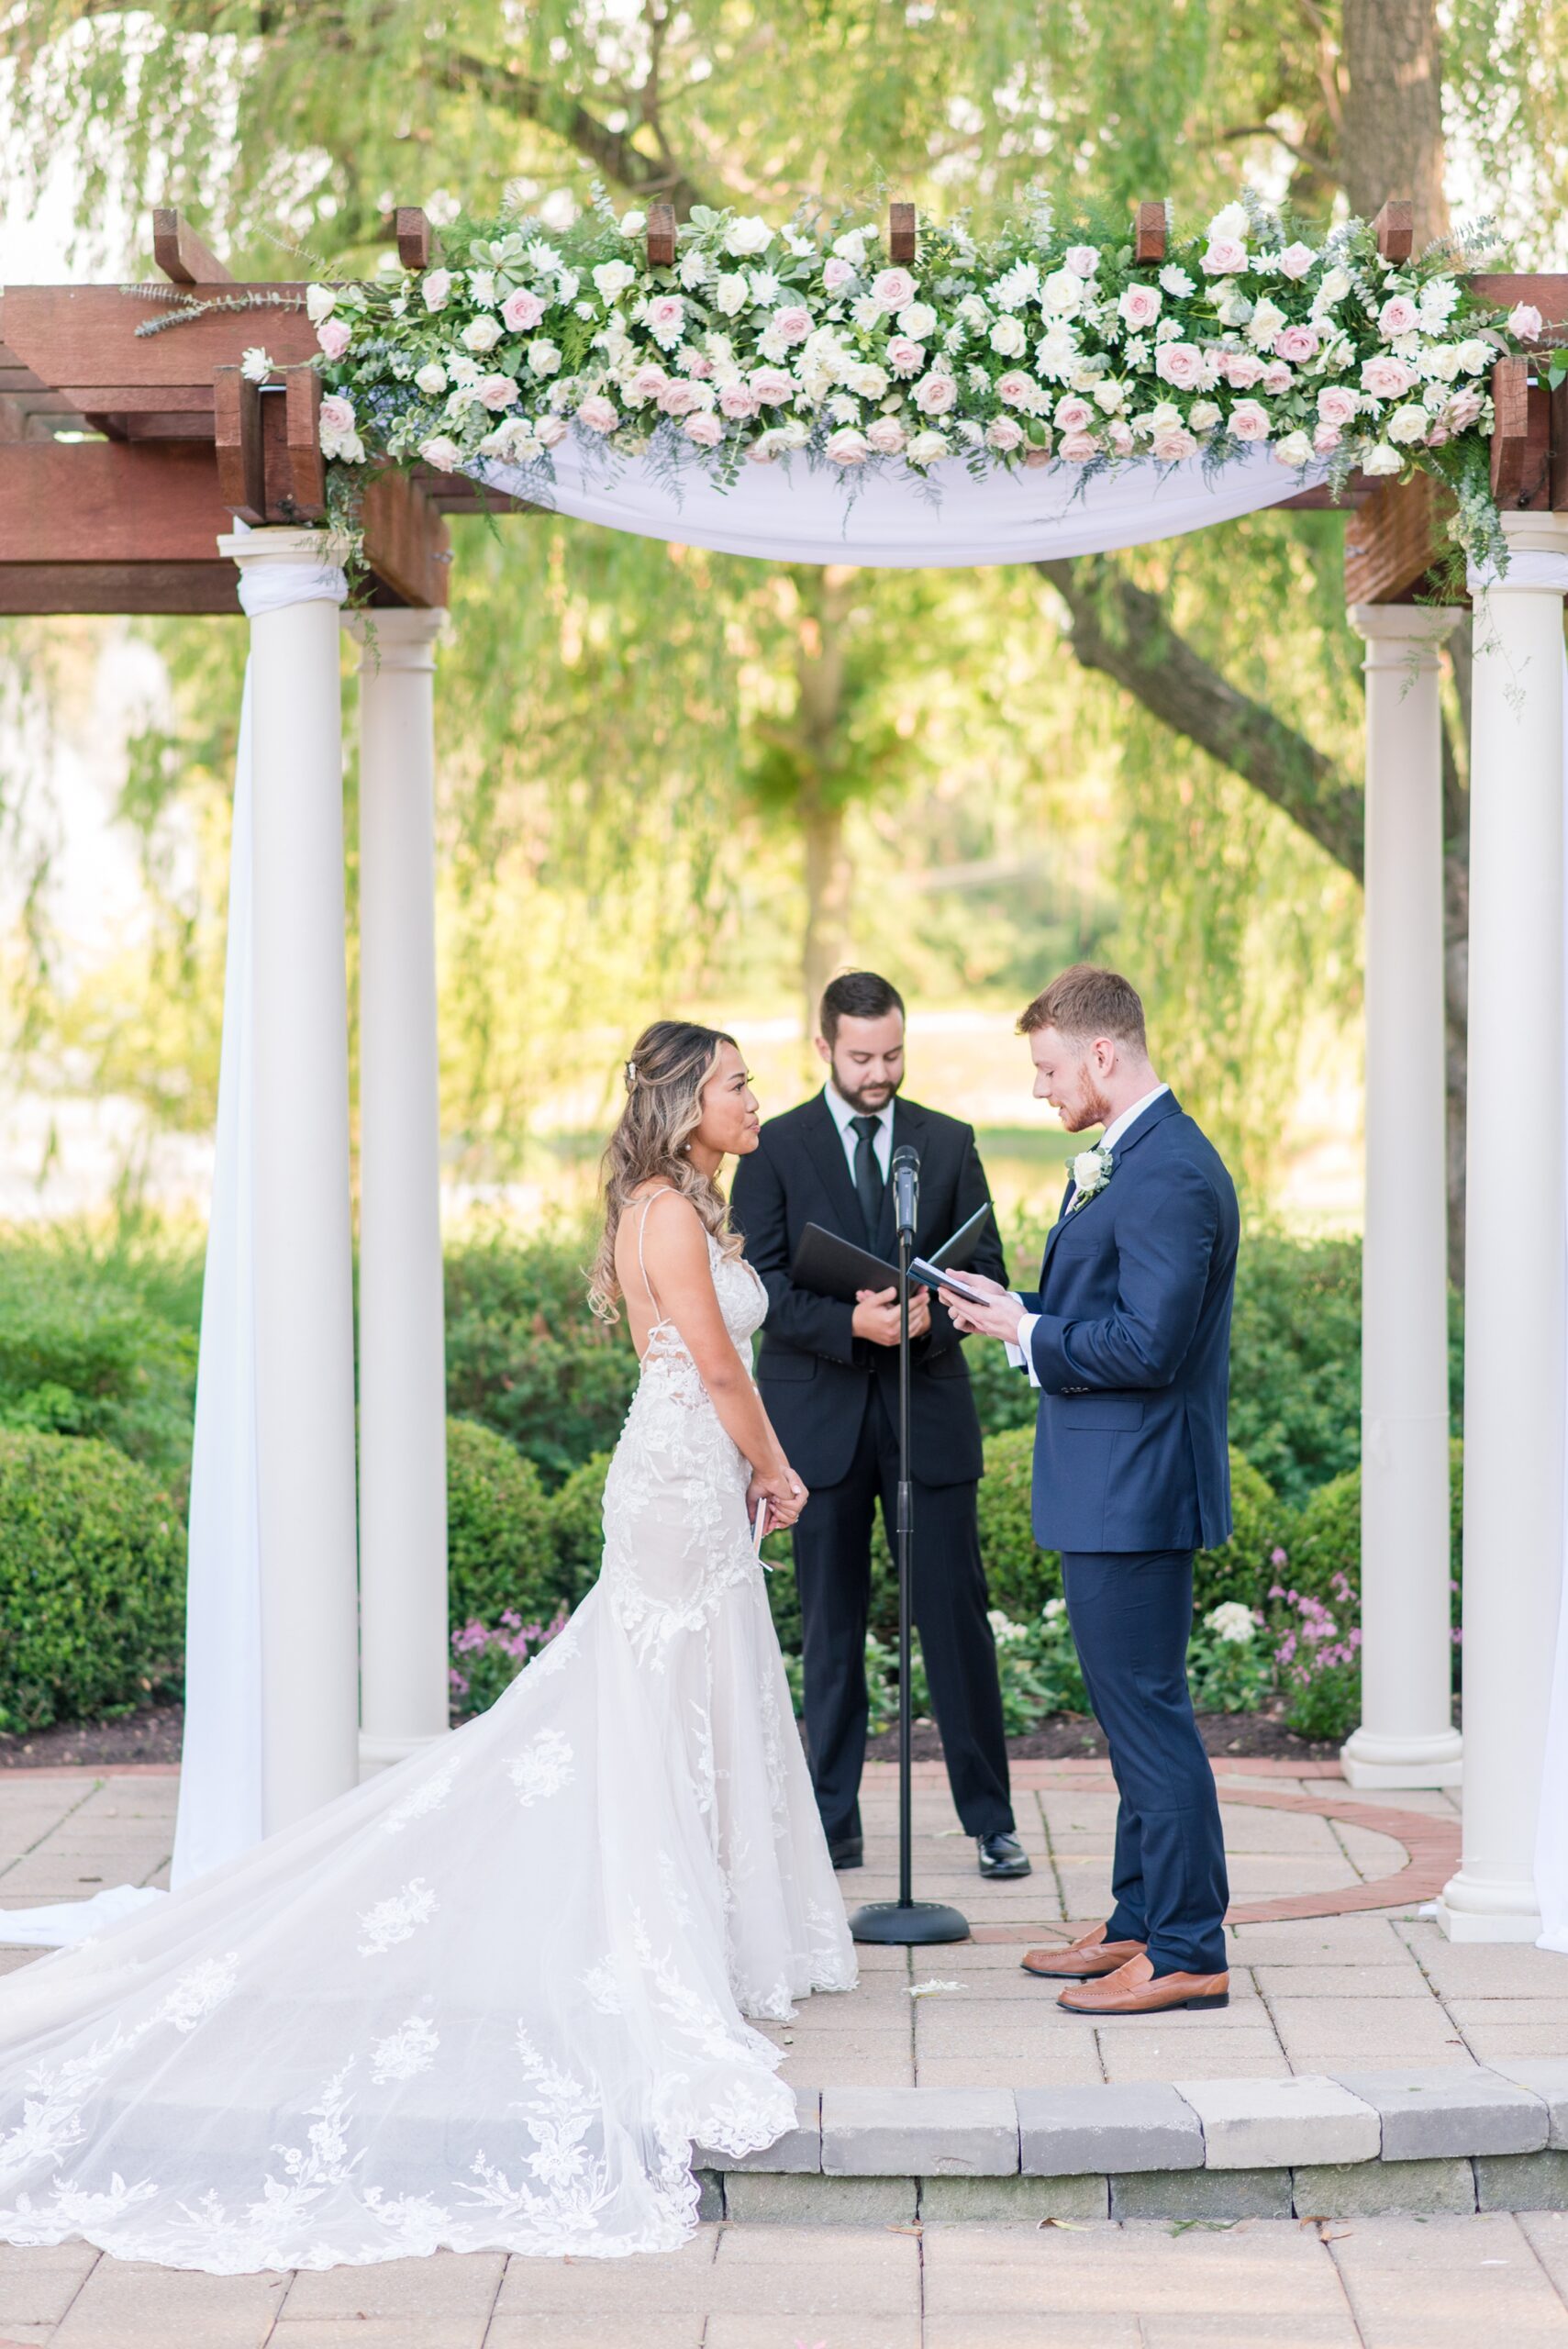 A groom reads his vows to his bride under a beautiful wedding pergola on a stone patio